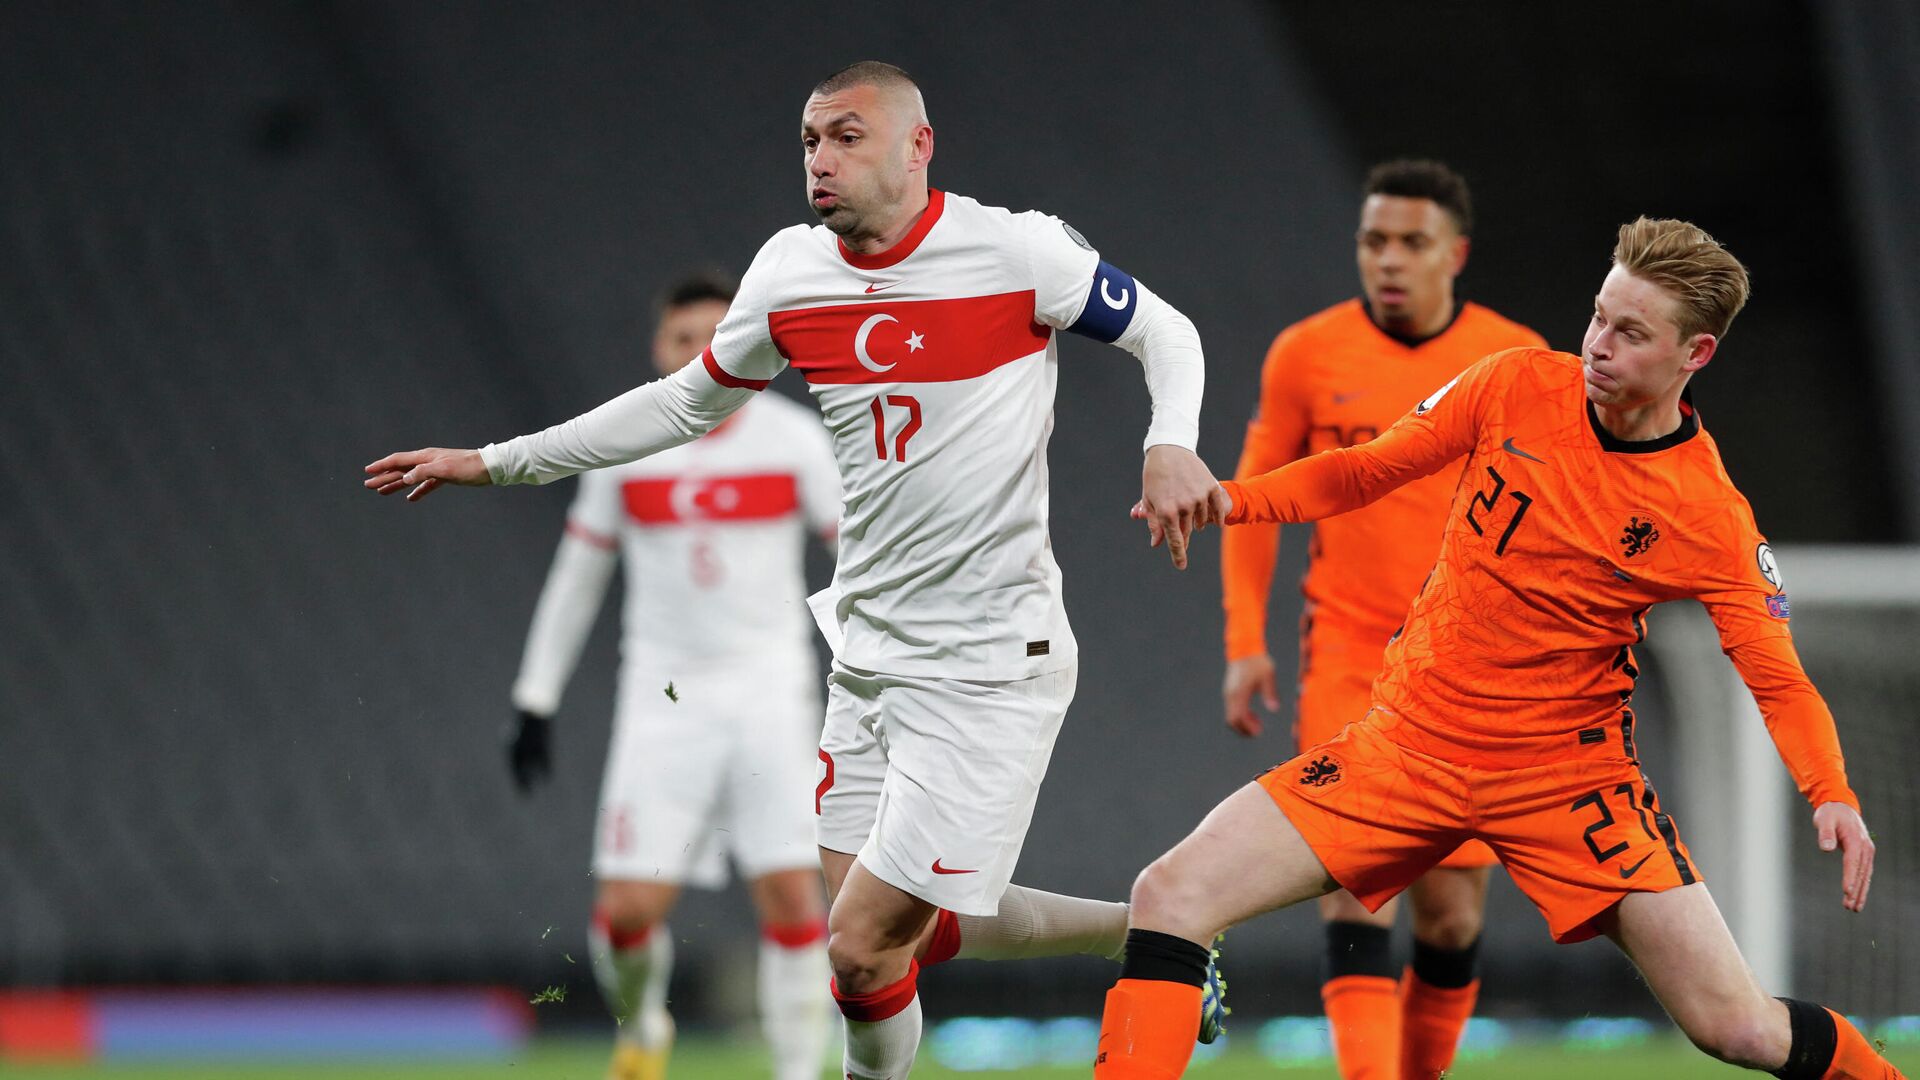 Turkey's forward Burak Yilmaz (L) is challenged by Netherlands' midfielder Frenkie De Jong during the FIFA World Cup Qatar 2022 qualification Group G football match between Turkey and The Netherlands at the Ataturk Olympic Stadium, in Istanbul, on March 24, 2021. -  (Photo by MURAD SEZER / POOL / AFP) - РИА Новости, 1920, 24.03.2021